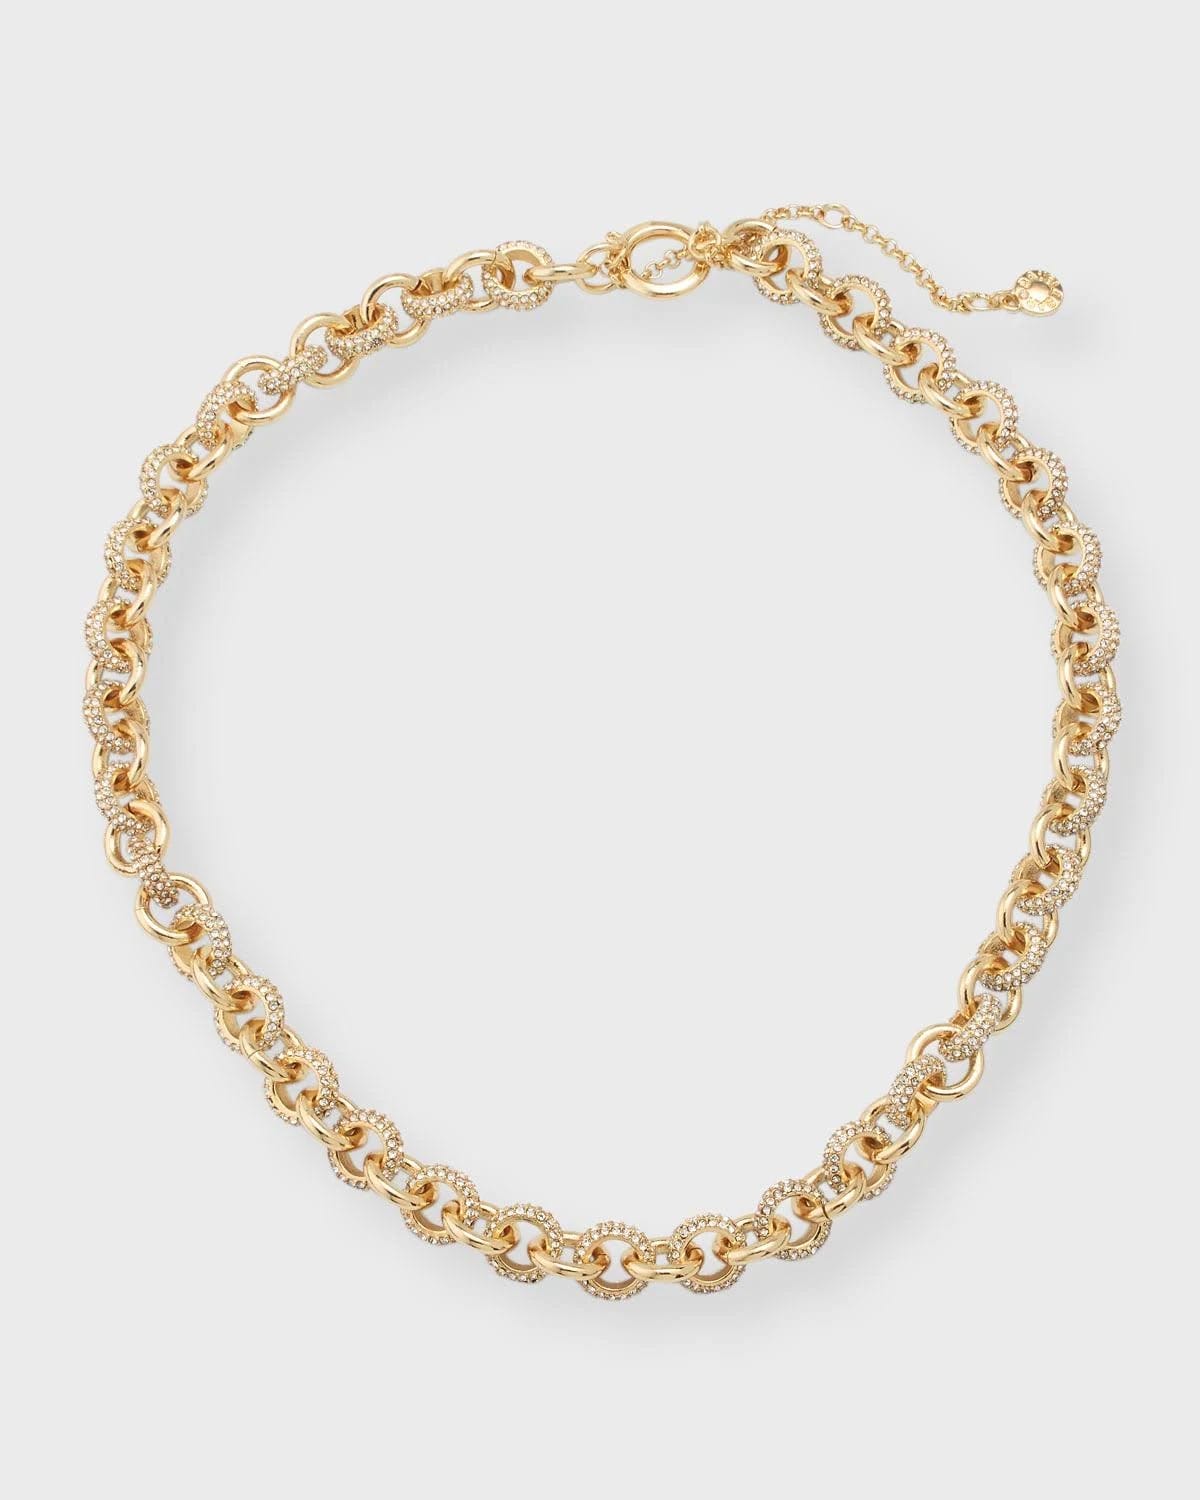 Golden Chain Link Necklace with Clear Stones | Image